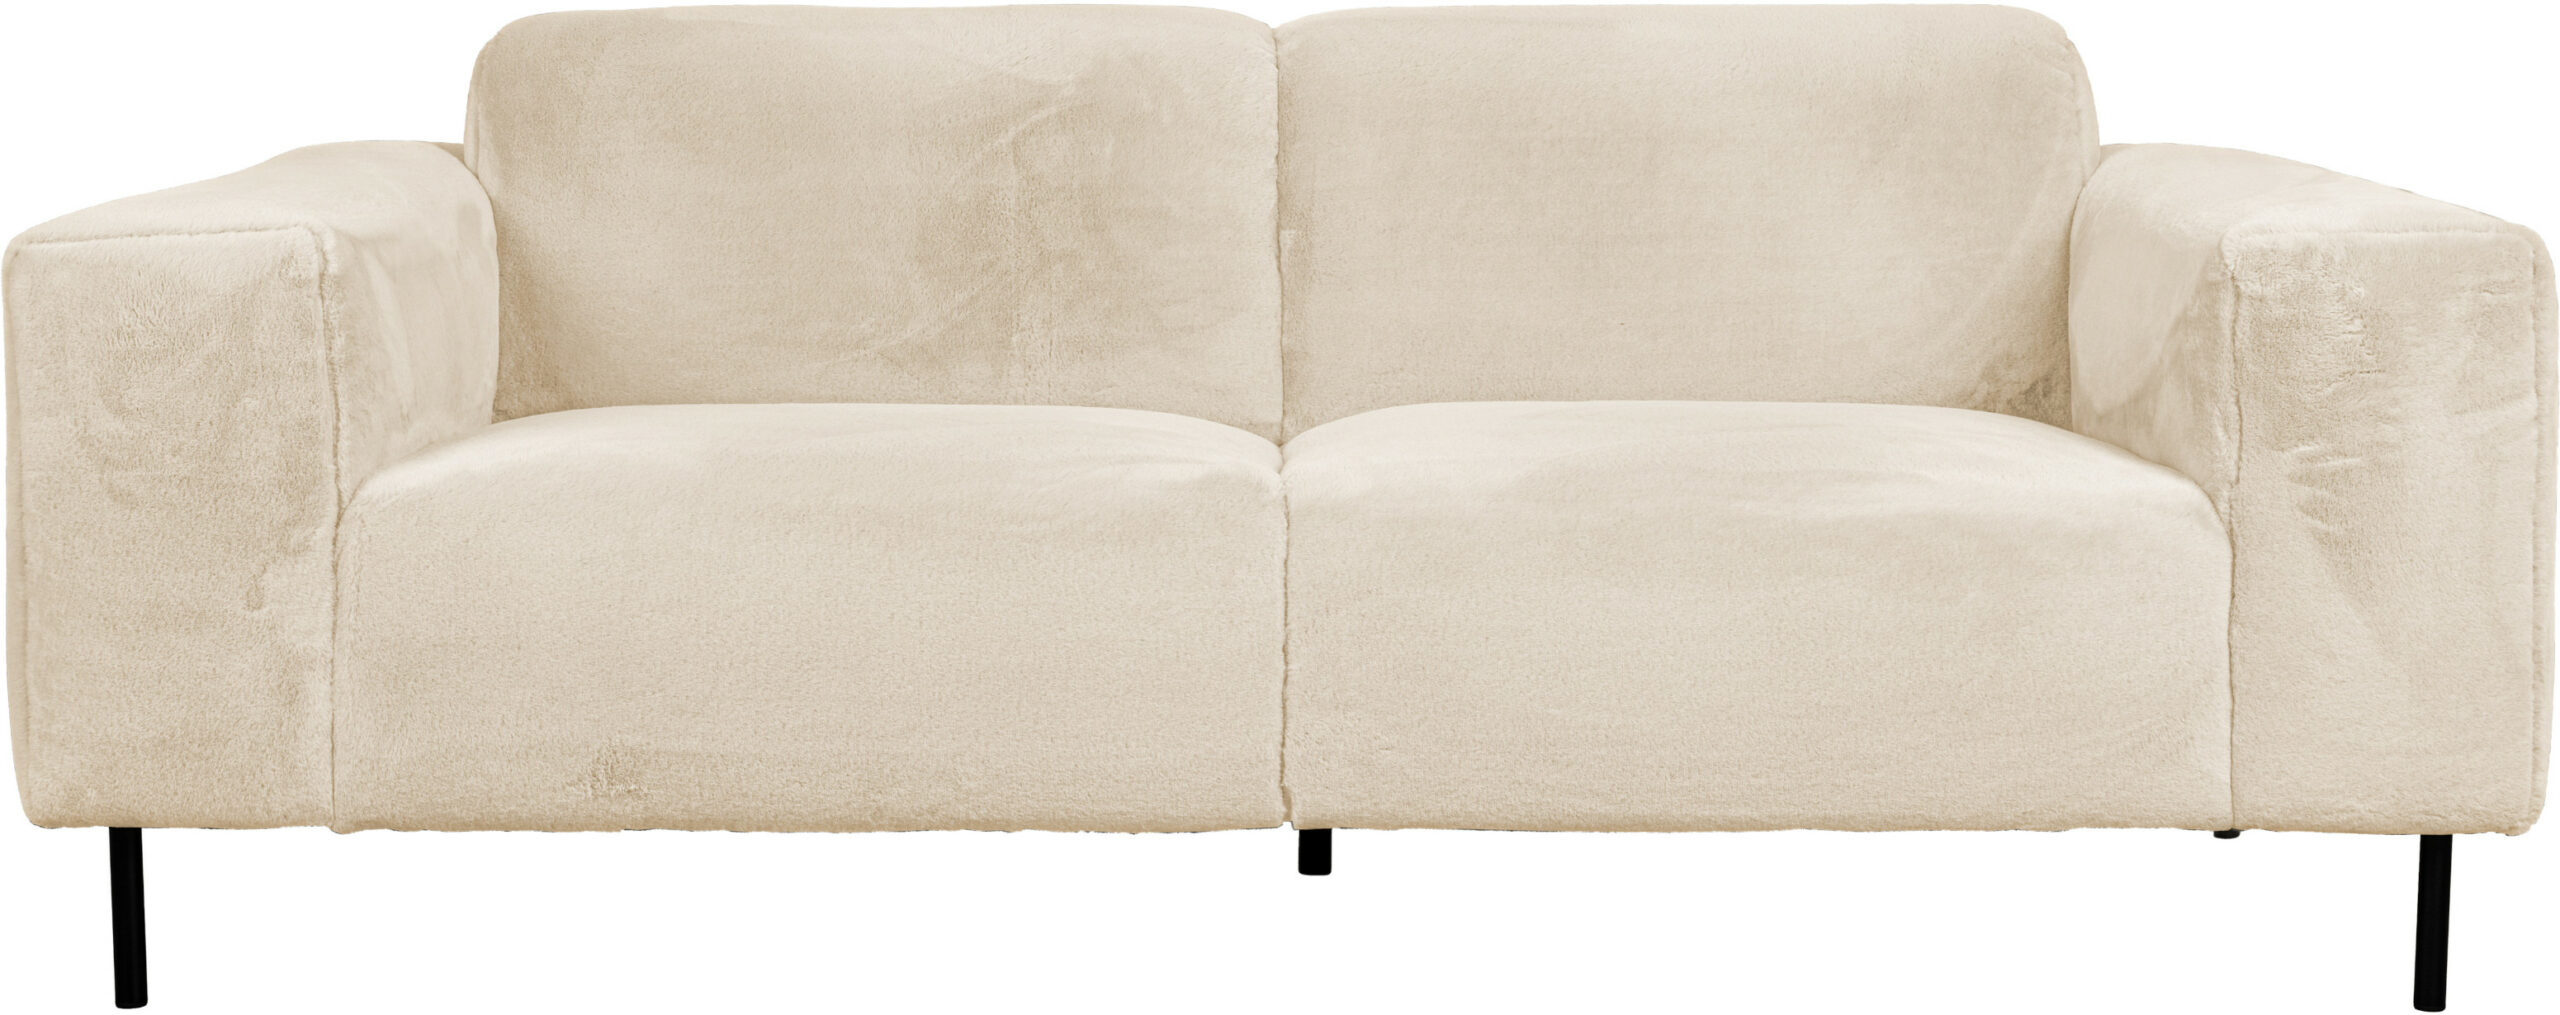 Bank Sylvia 2,5 Seater Faux Fur White Label Living  ZVR3200264